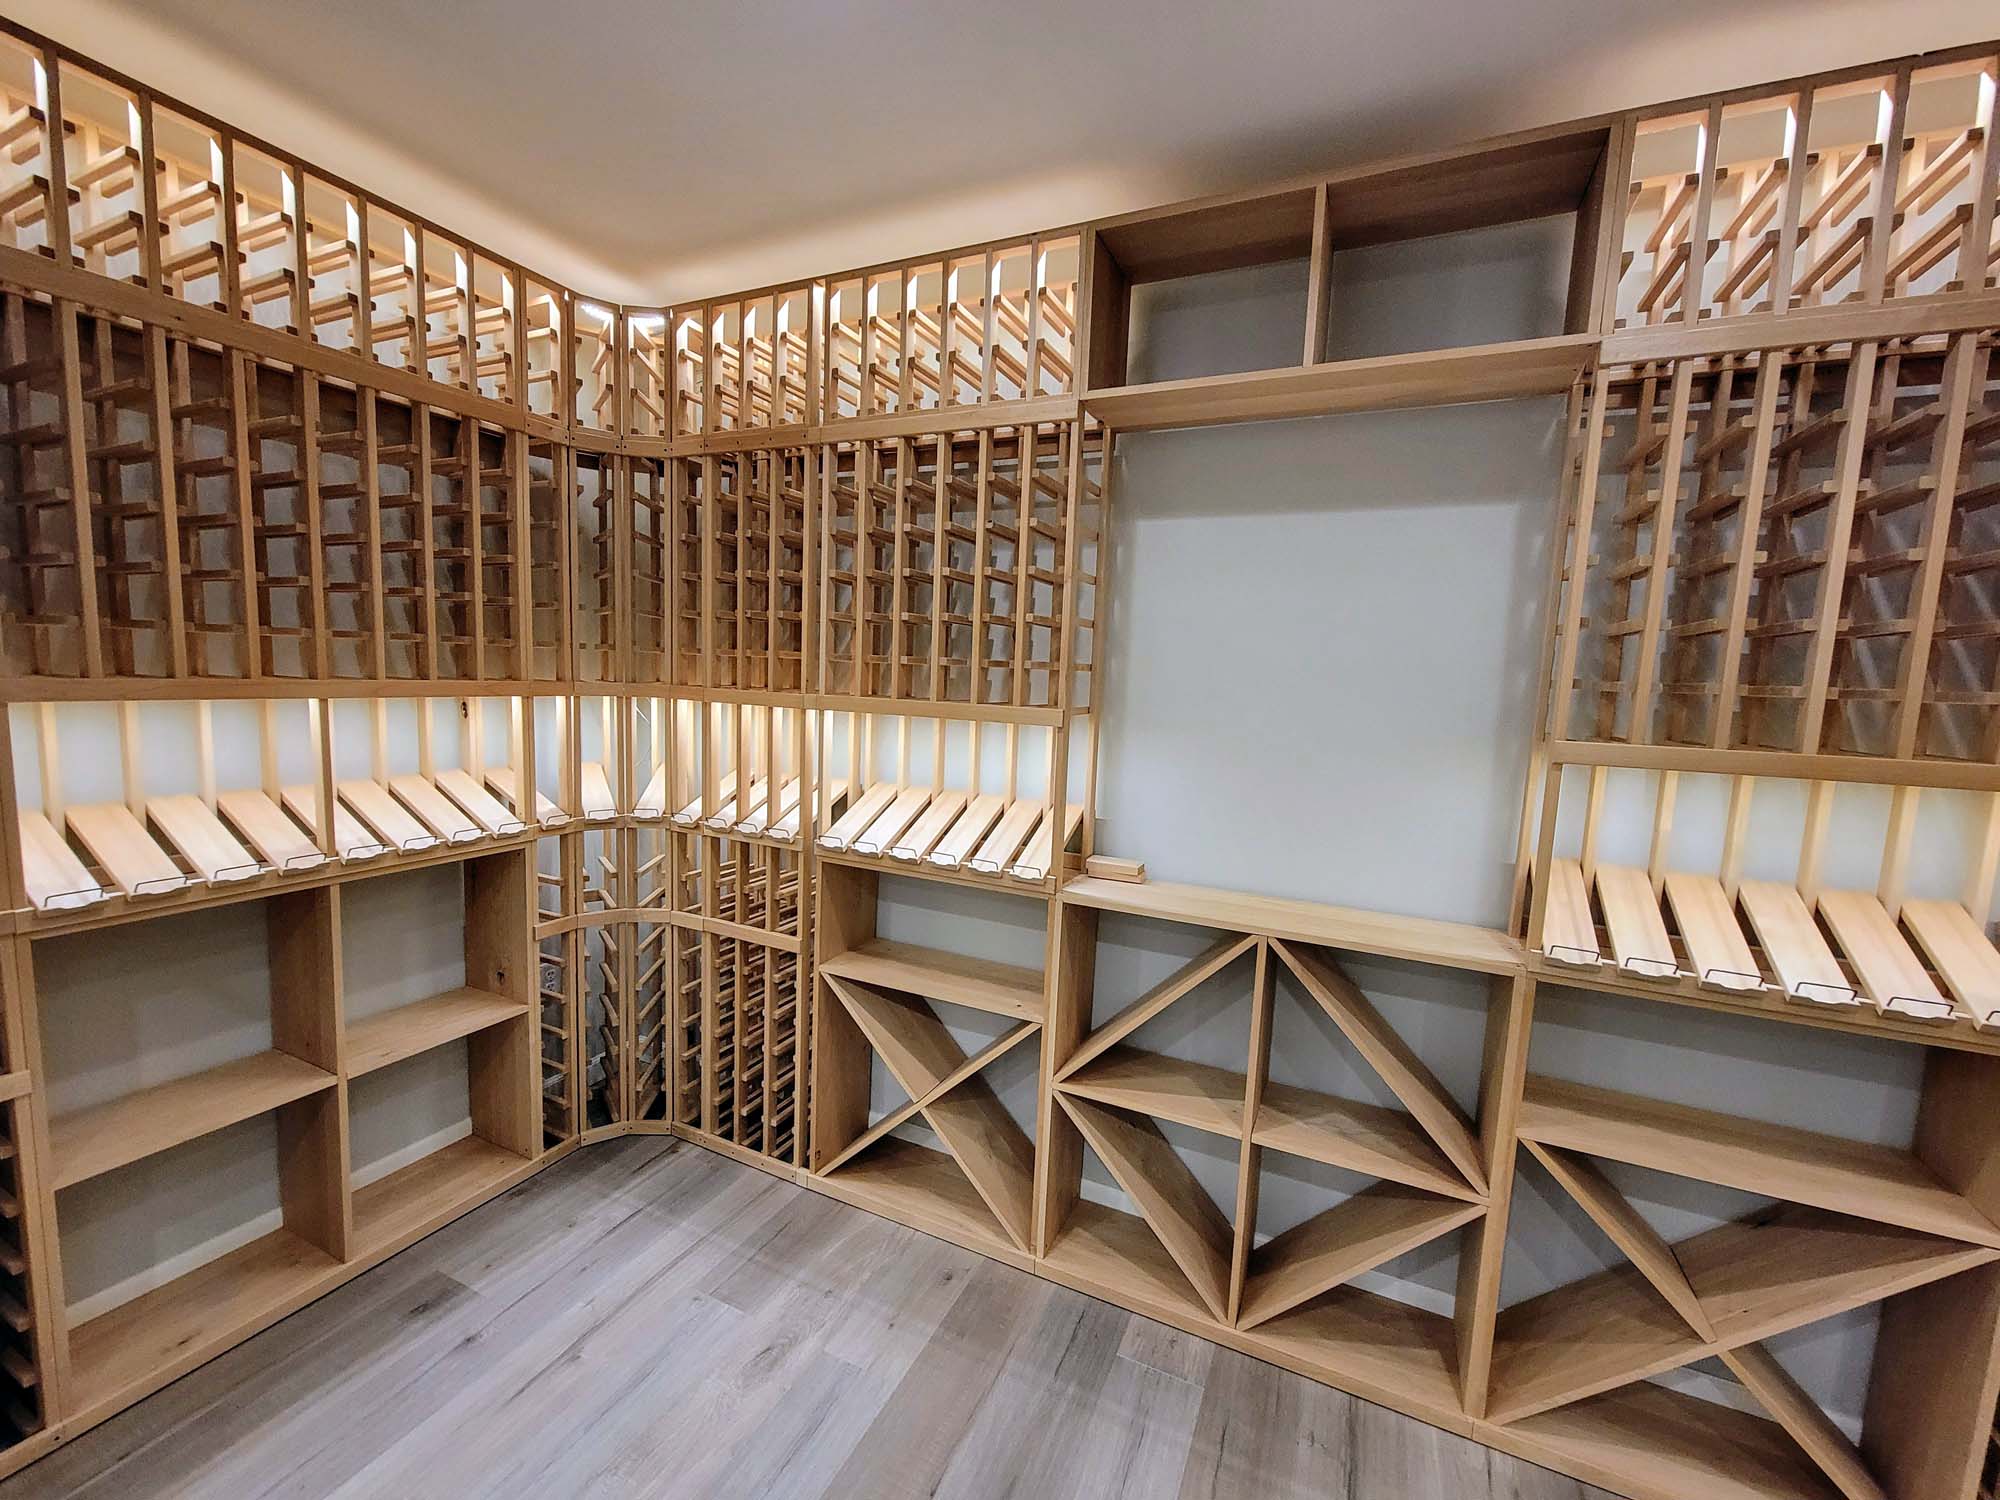 All the wine storage you'll ever need!